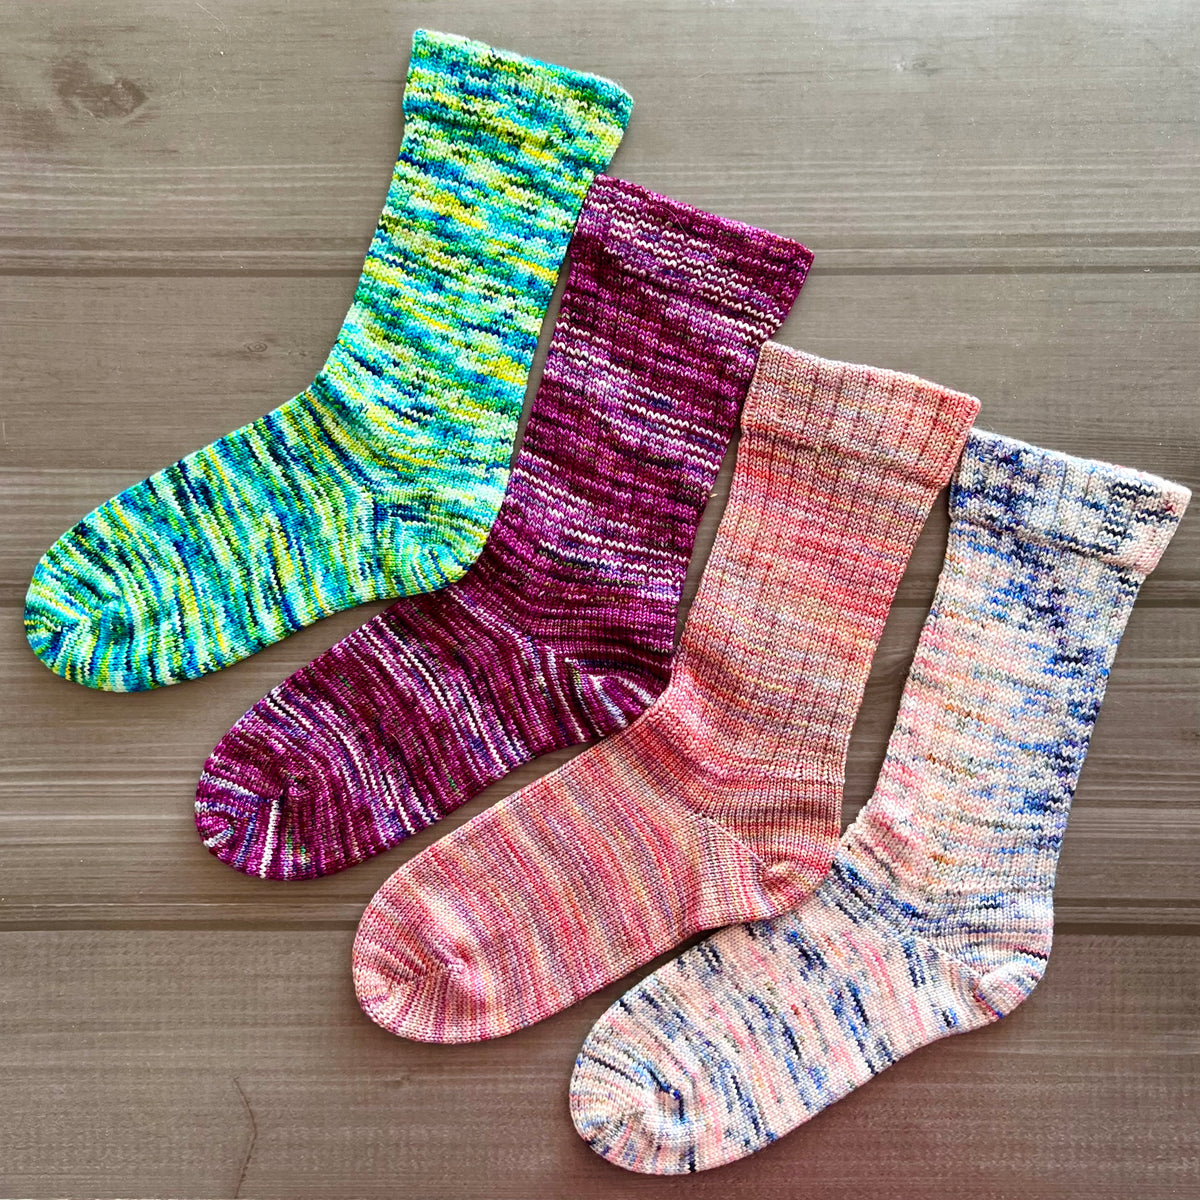 Step Up Your Sock Game - Dye and Knit Your Very Own Sock